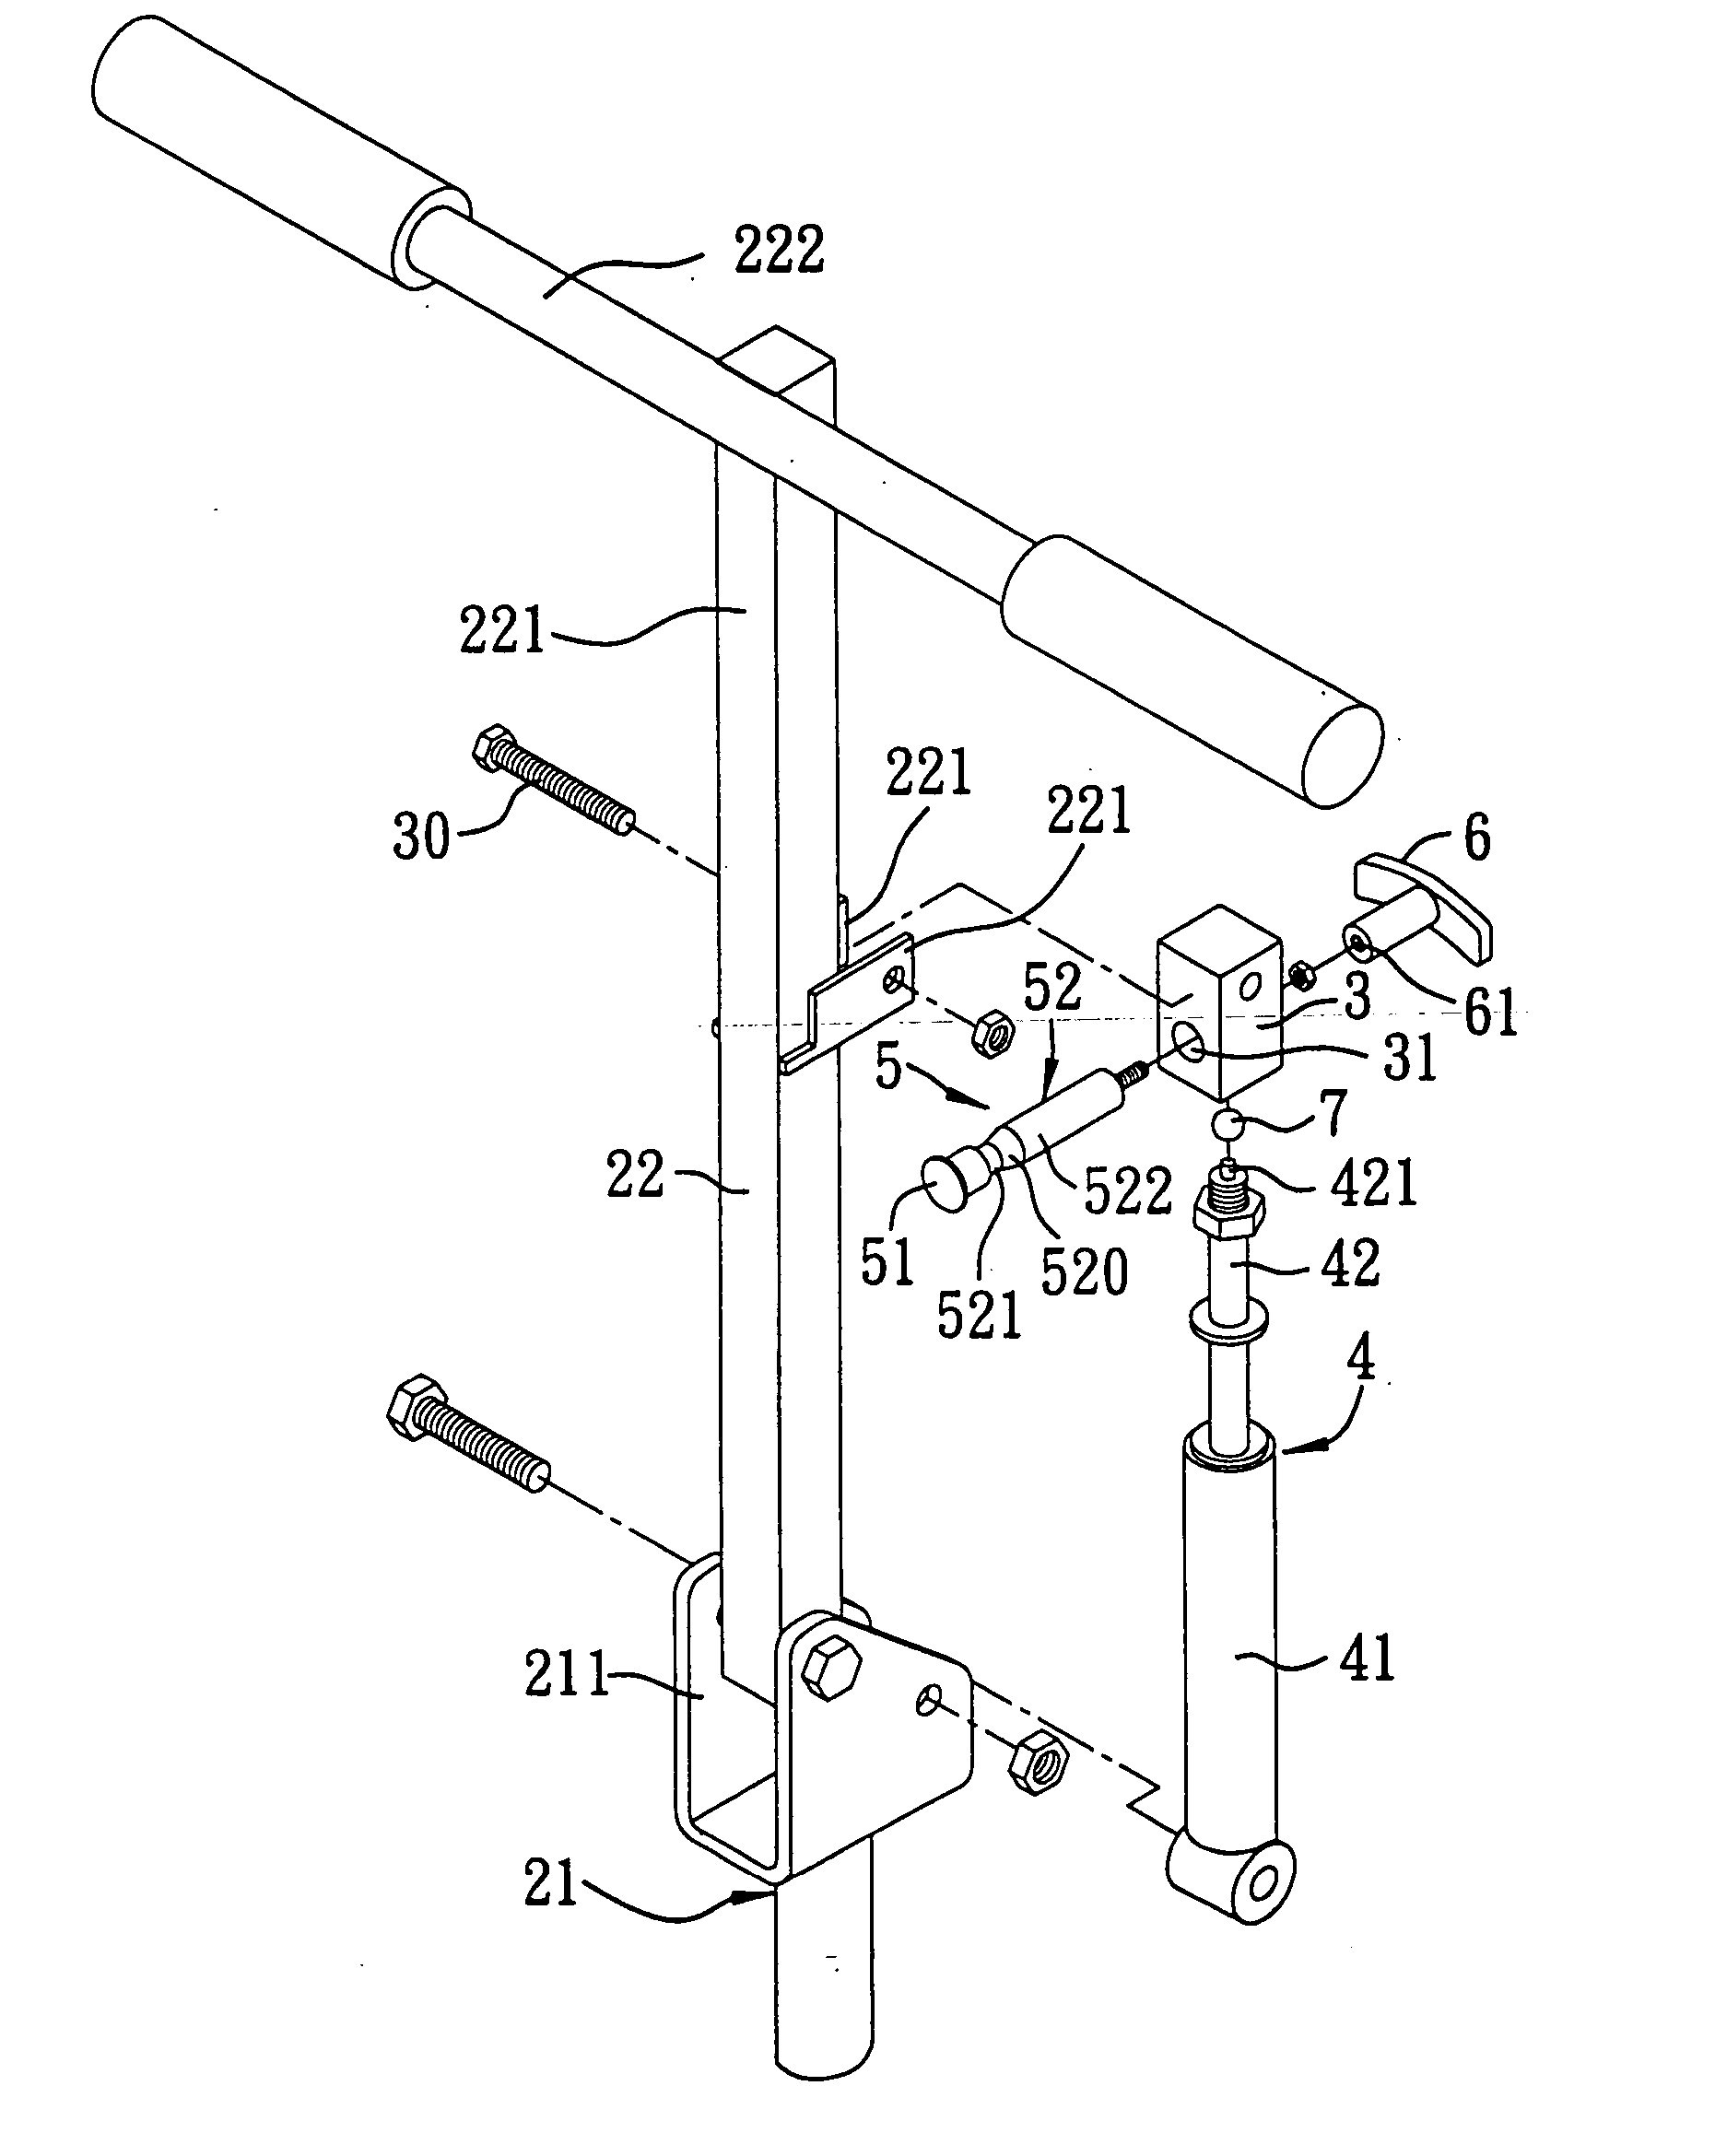 Handle-adjusting device for adjusting the position of a handle relative to a vehicle frame